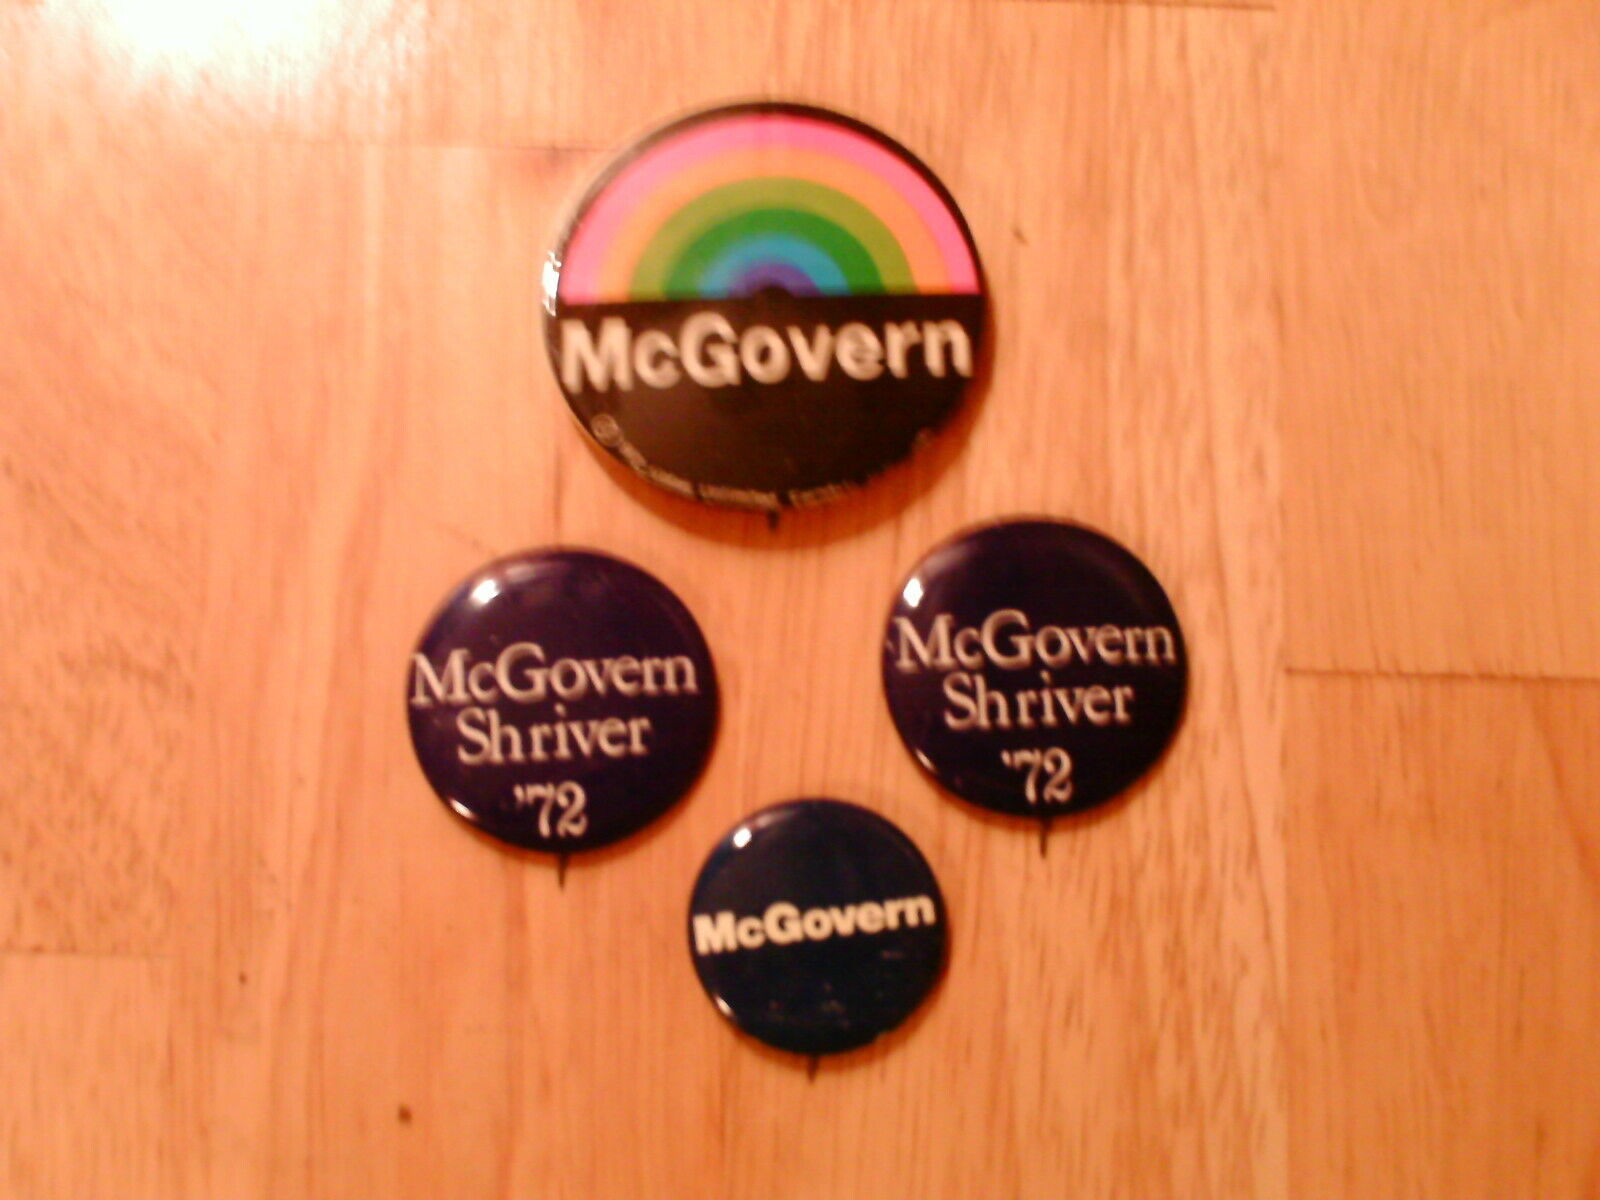 4 McGovern & McGovern-Shriver Presidential Campaign Buttons - 1972